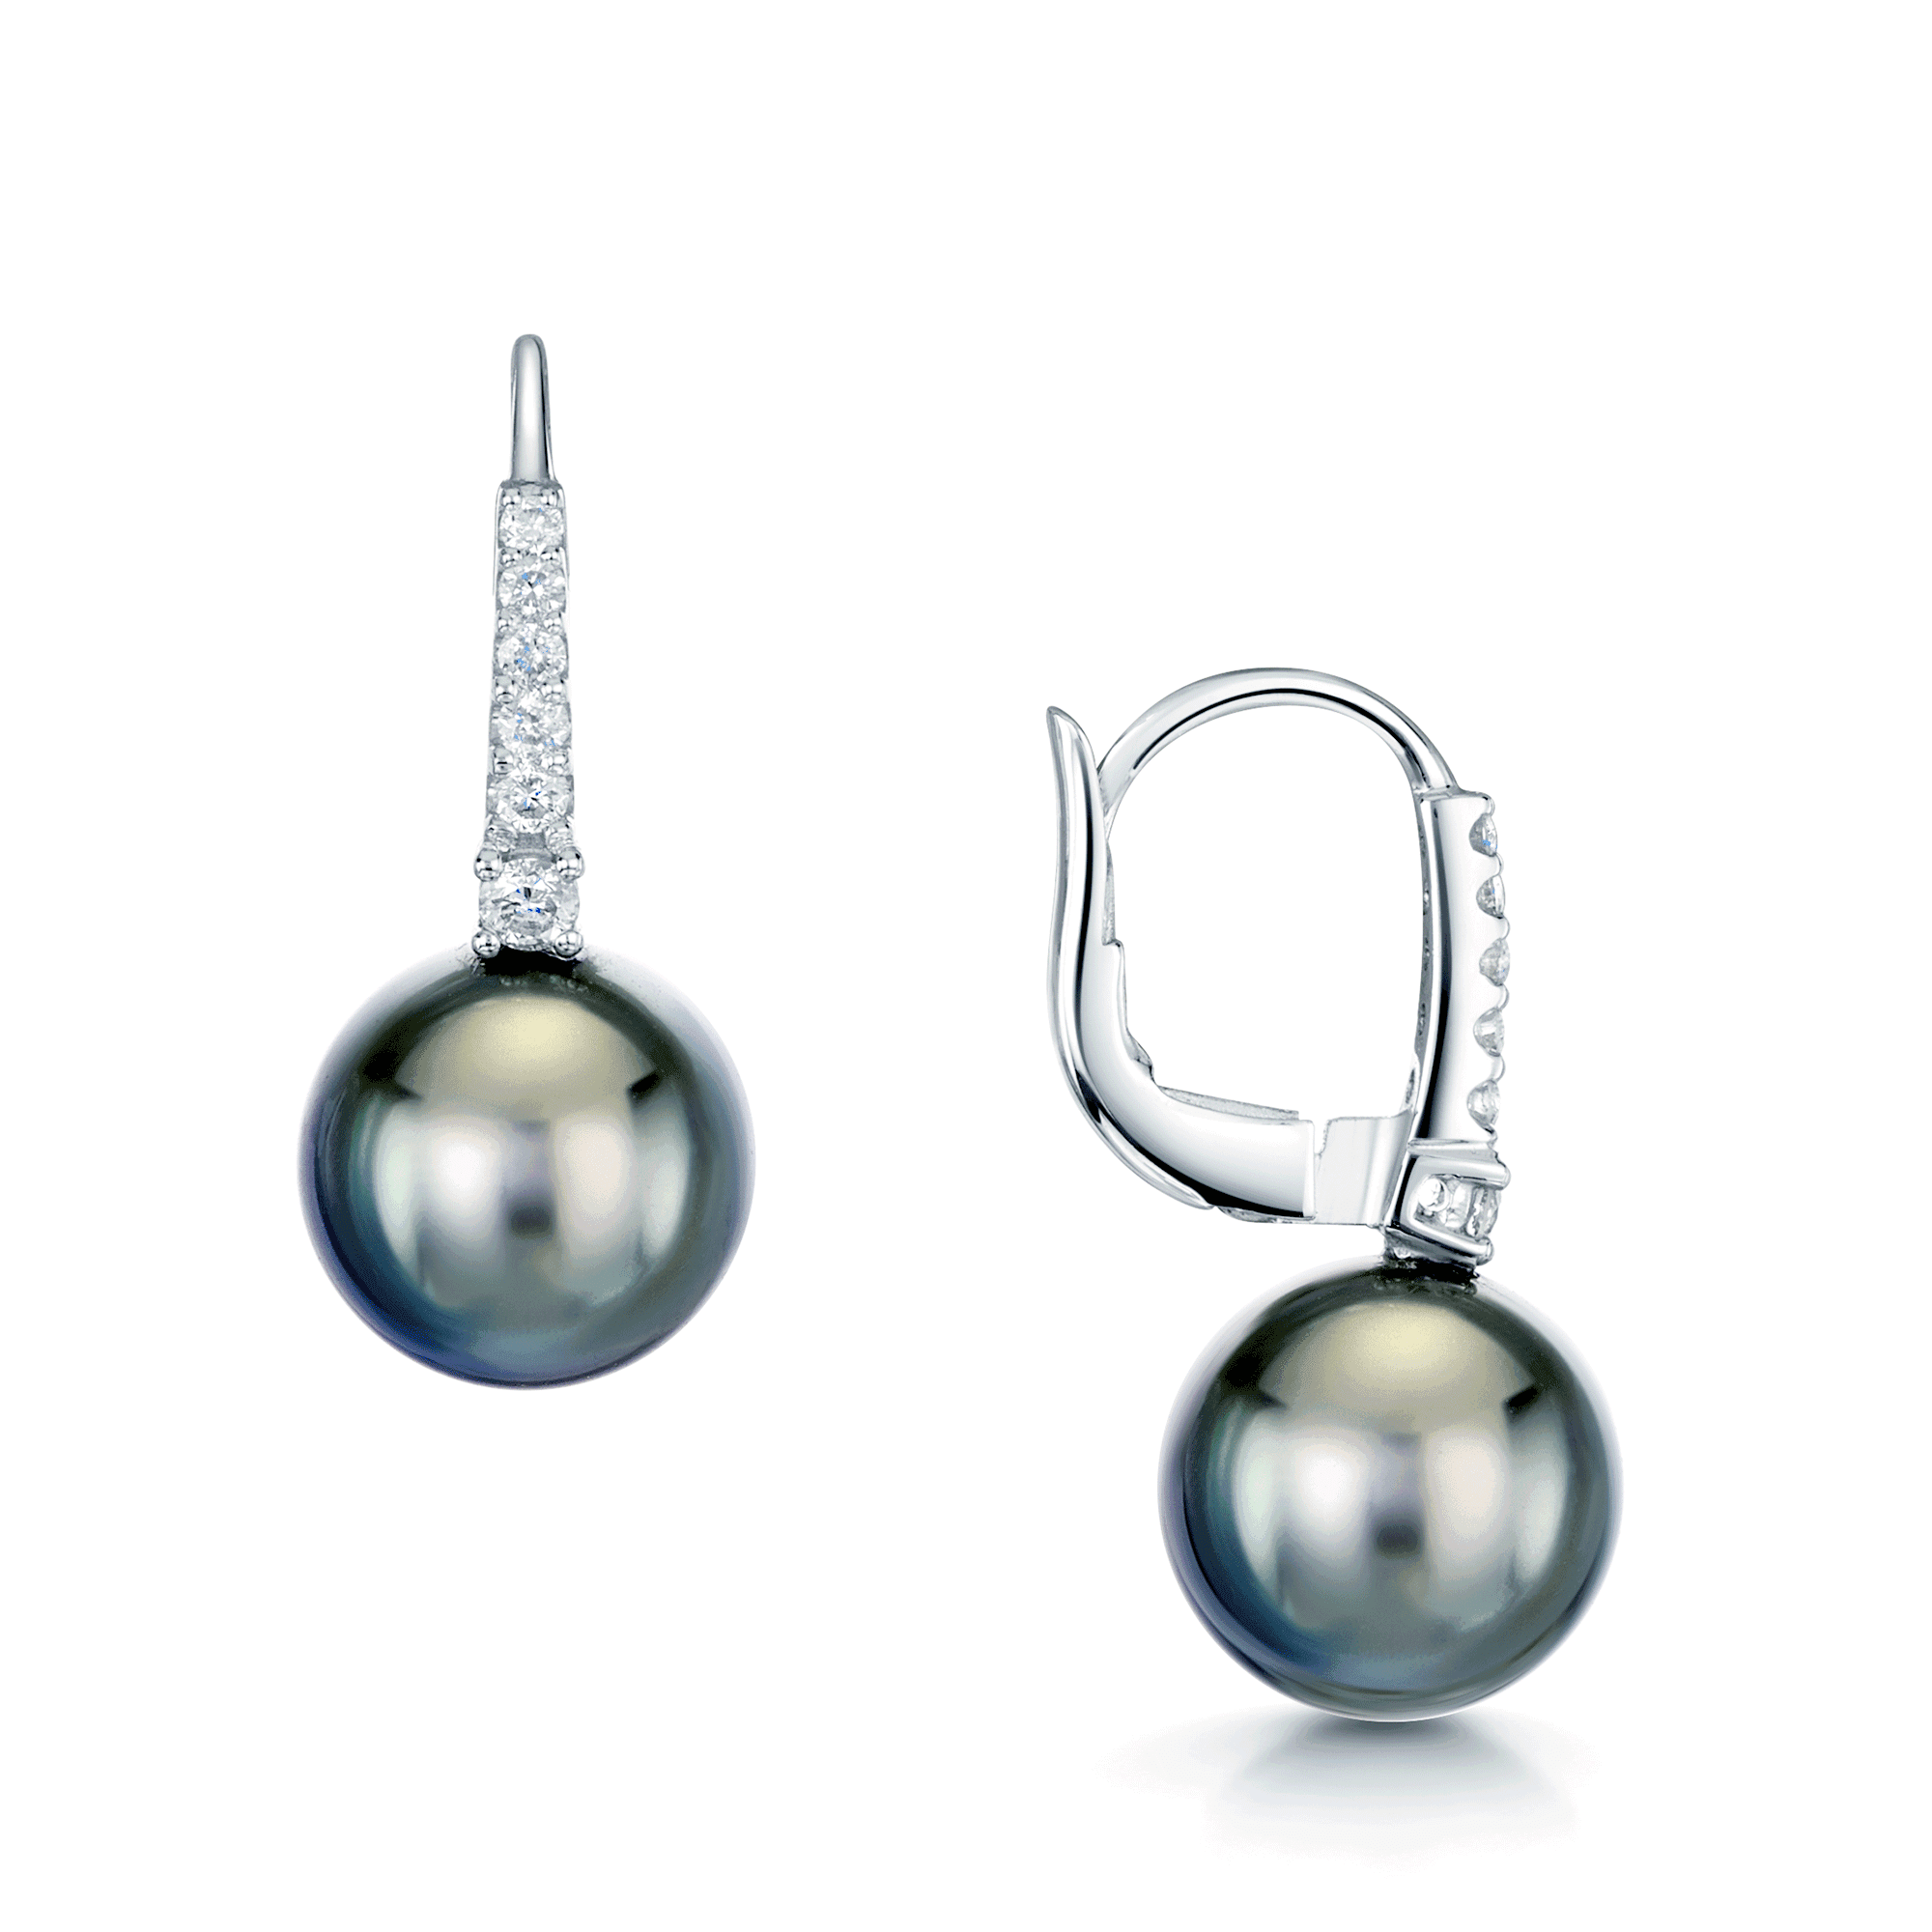 18ct White Gold Tahitian Black Pearl and Diamond Small Hoop Style Earrings